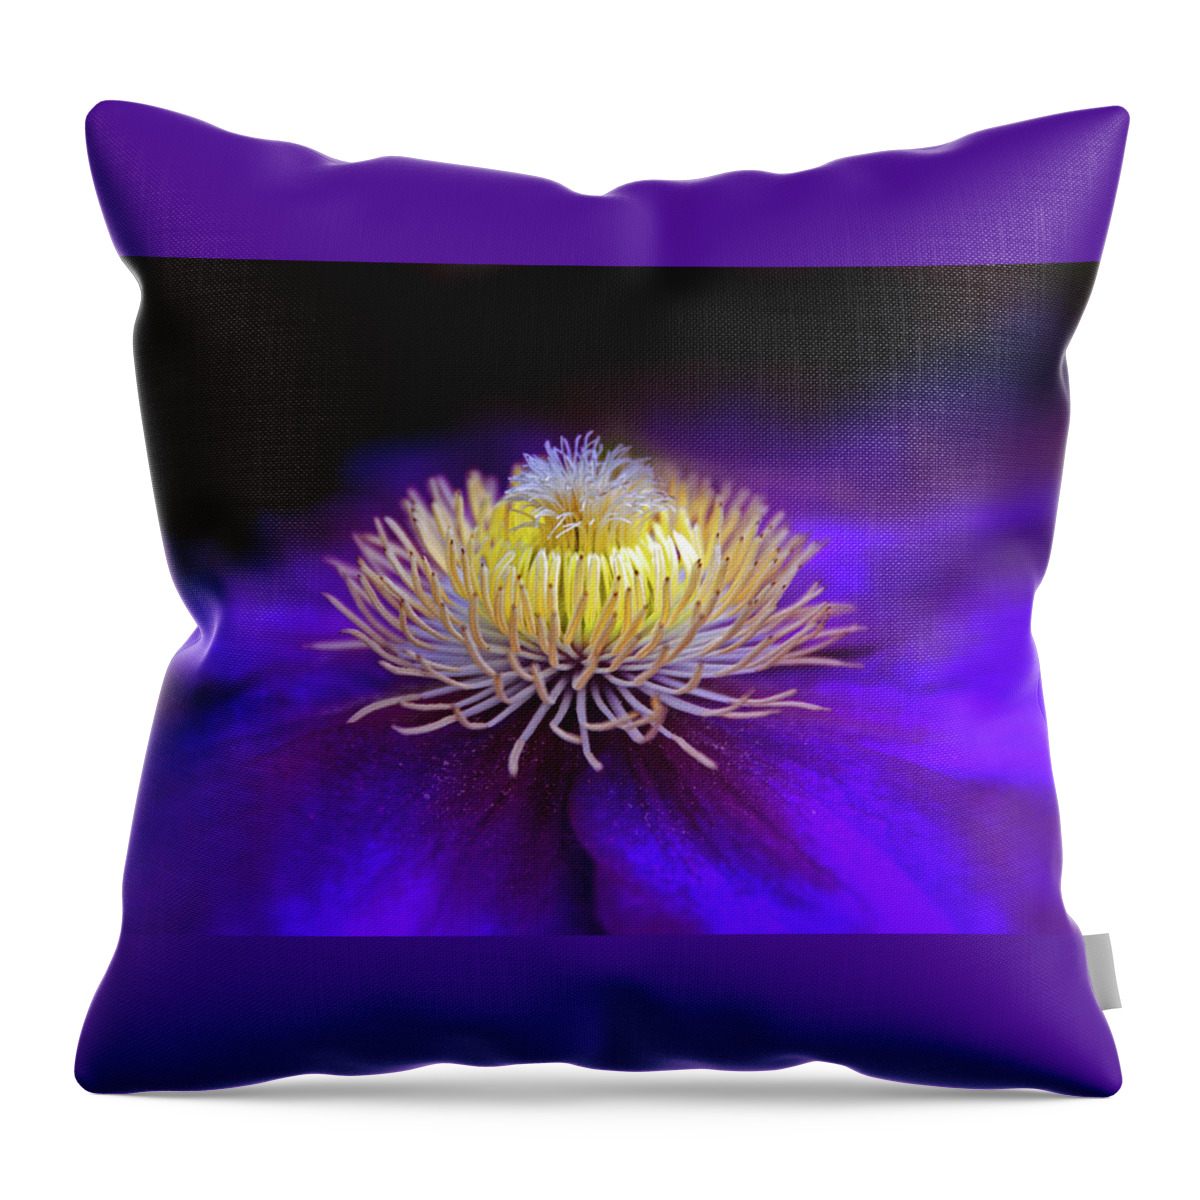 Flower Throw Pillow featuring the photograph Clematis Aglow by Jessica Jenney